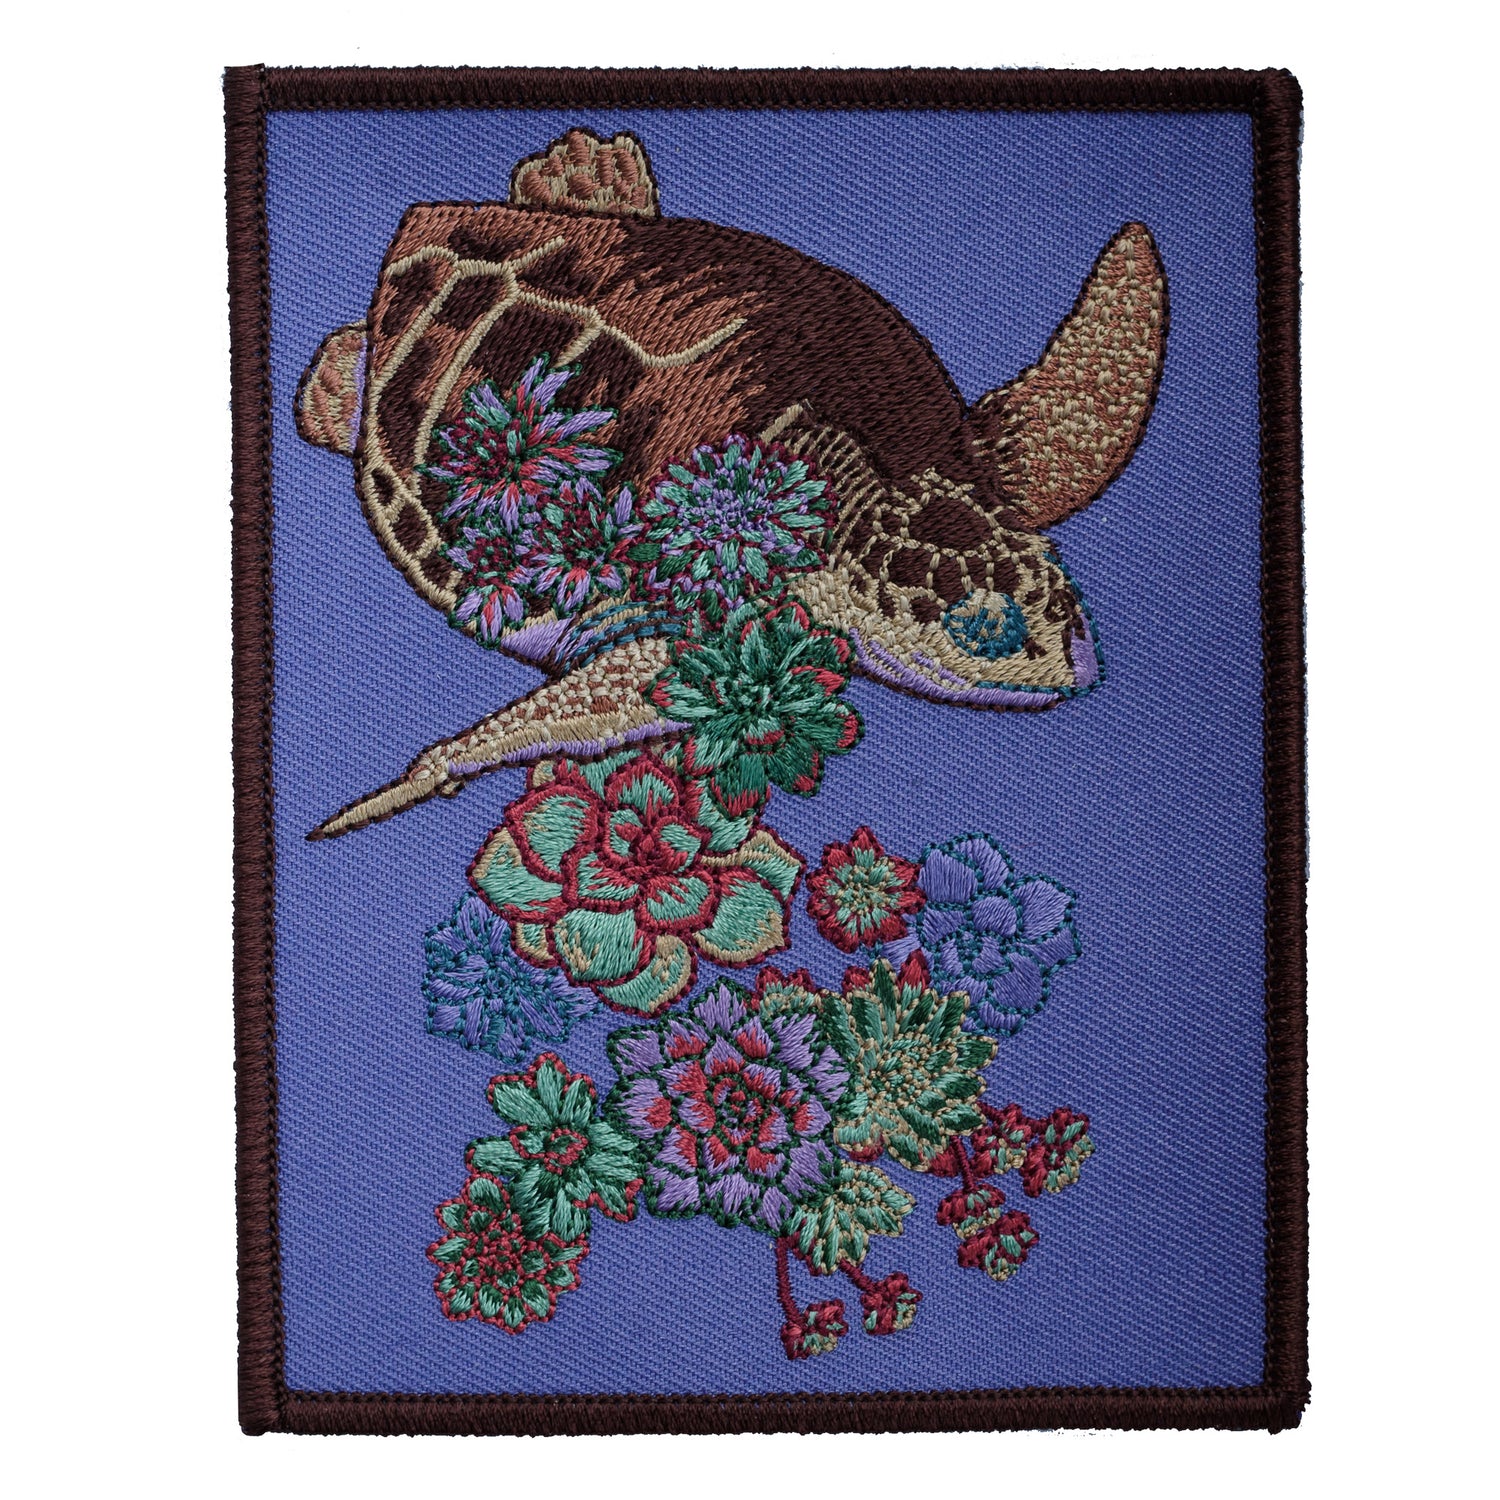 Detail of Turtle Succulent Embroidered Patch from WildloreFromArcana